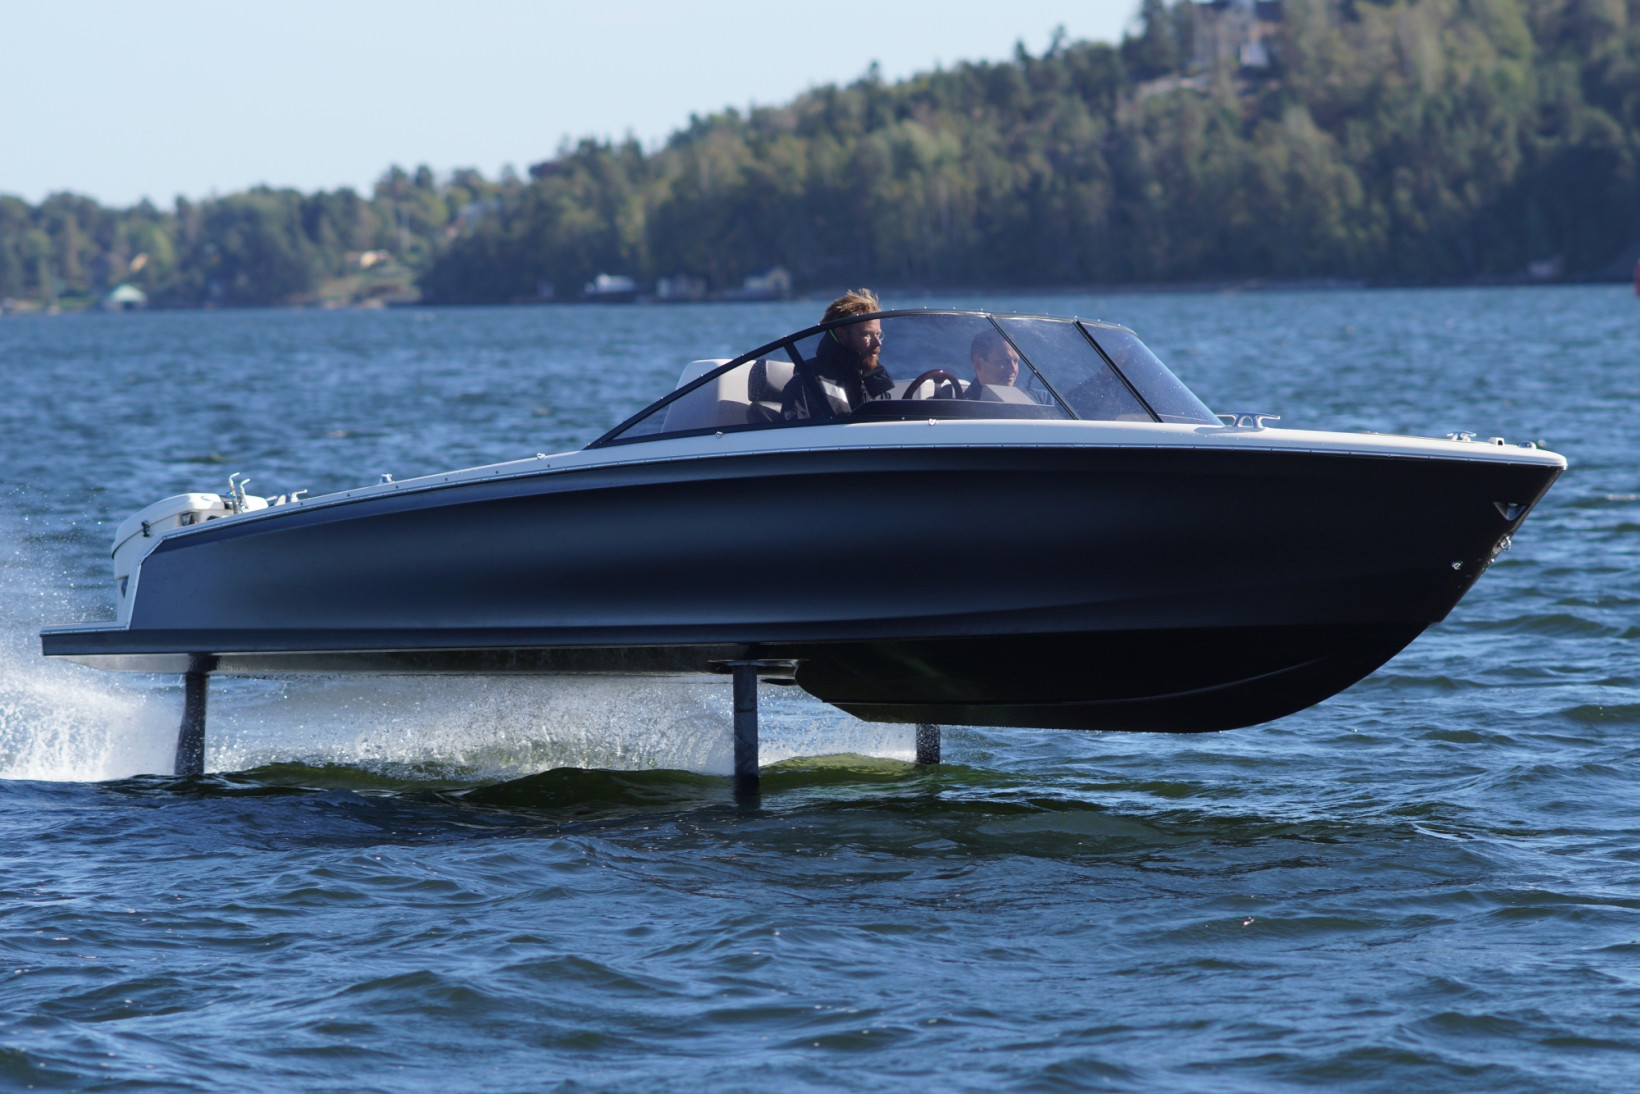 An image of Gustav Hasselskog test driving the first C-7 prototype hydrofoil boat. Credit: Candela